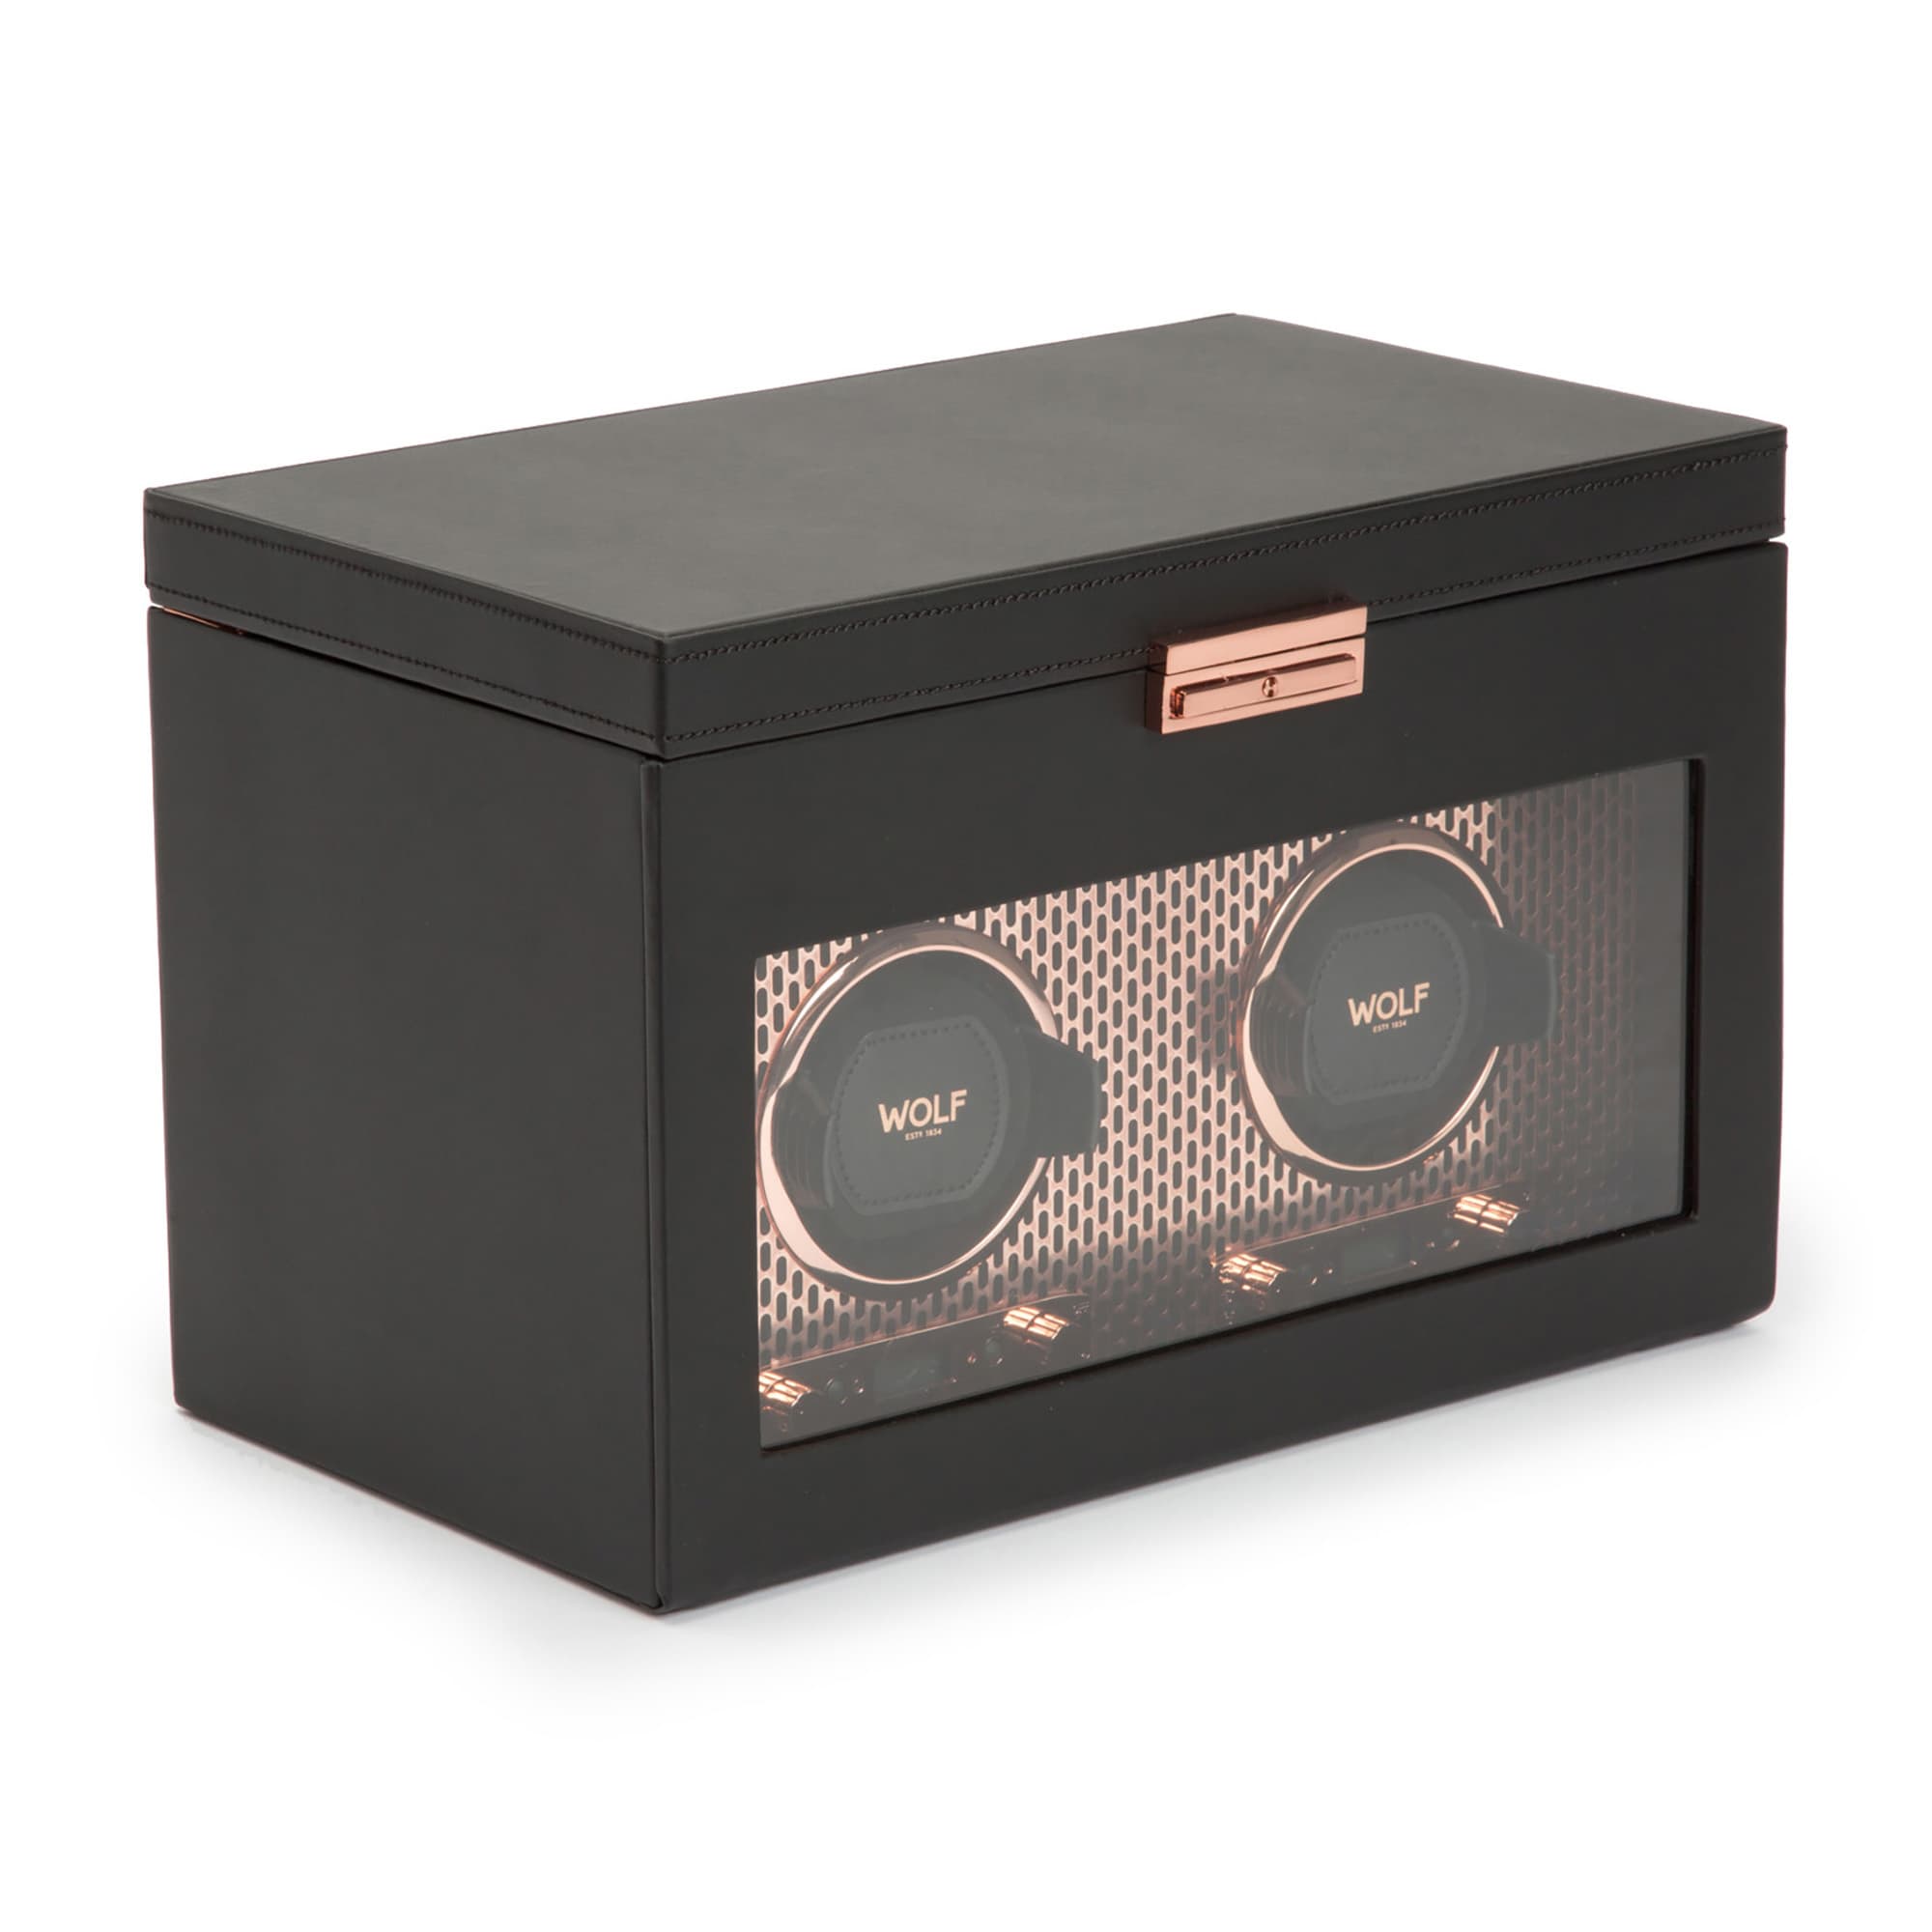 Wolf-Axis-Double-Watch-Winder-with-Storage-Copper-469316-1